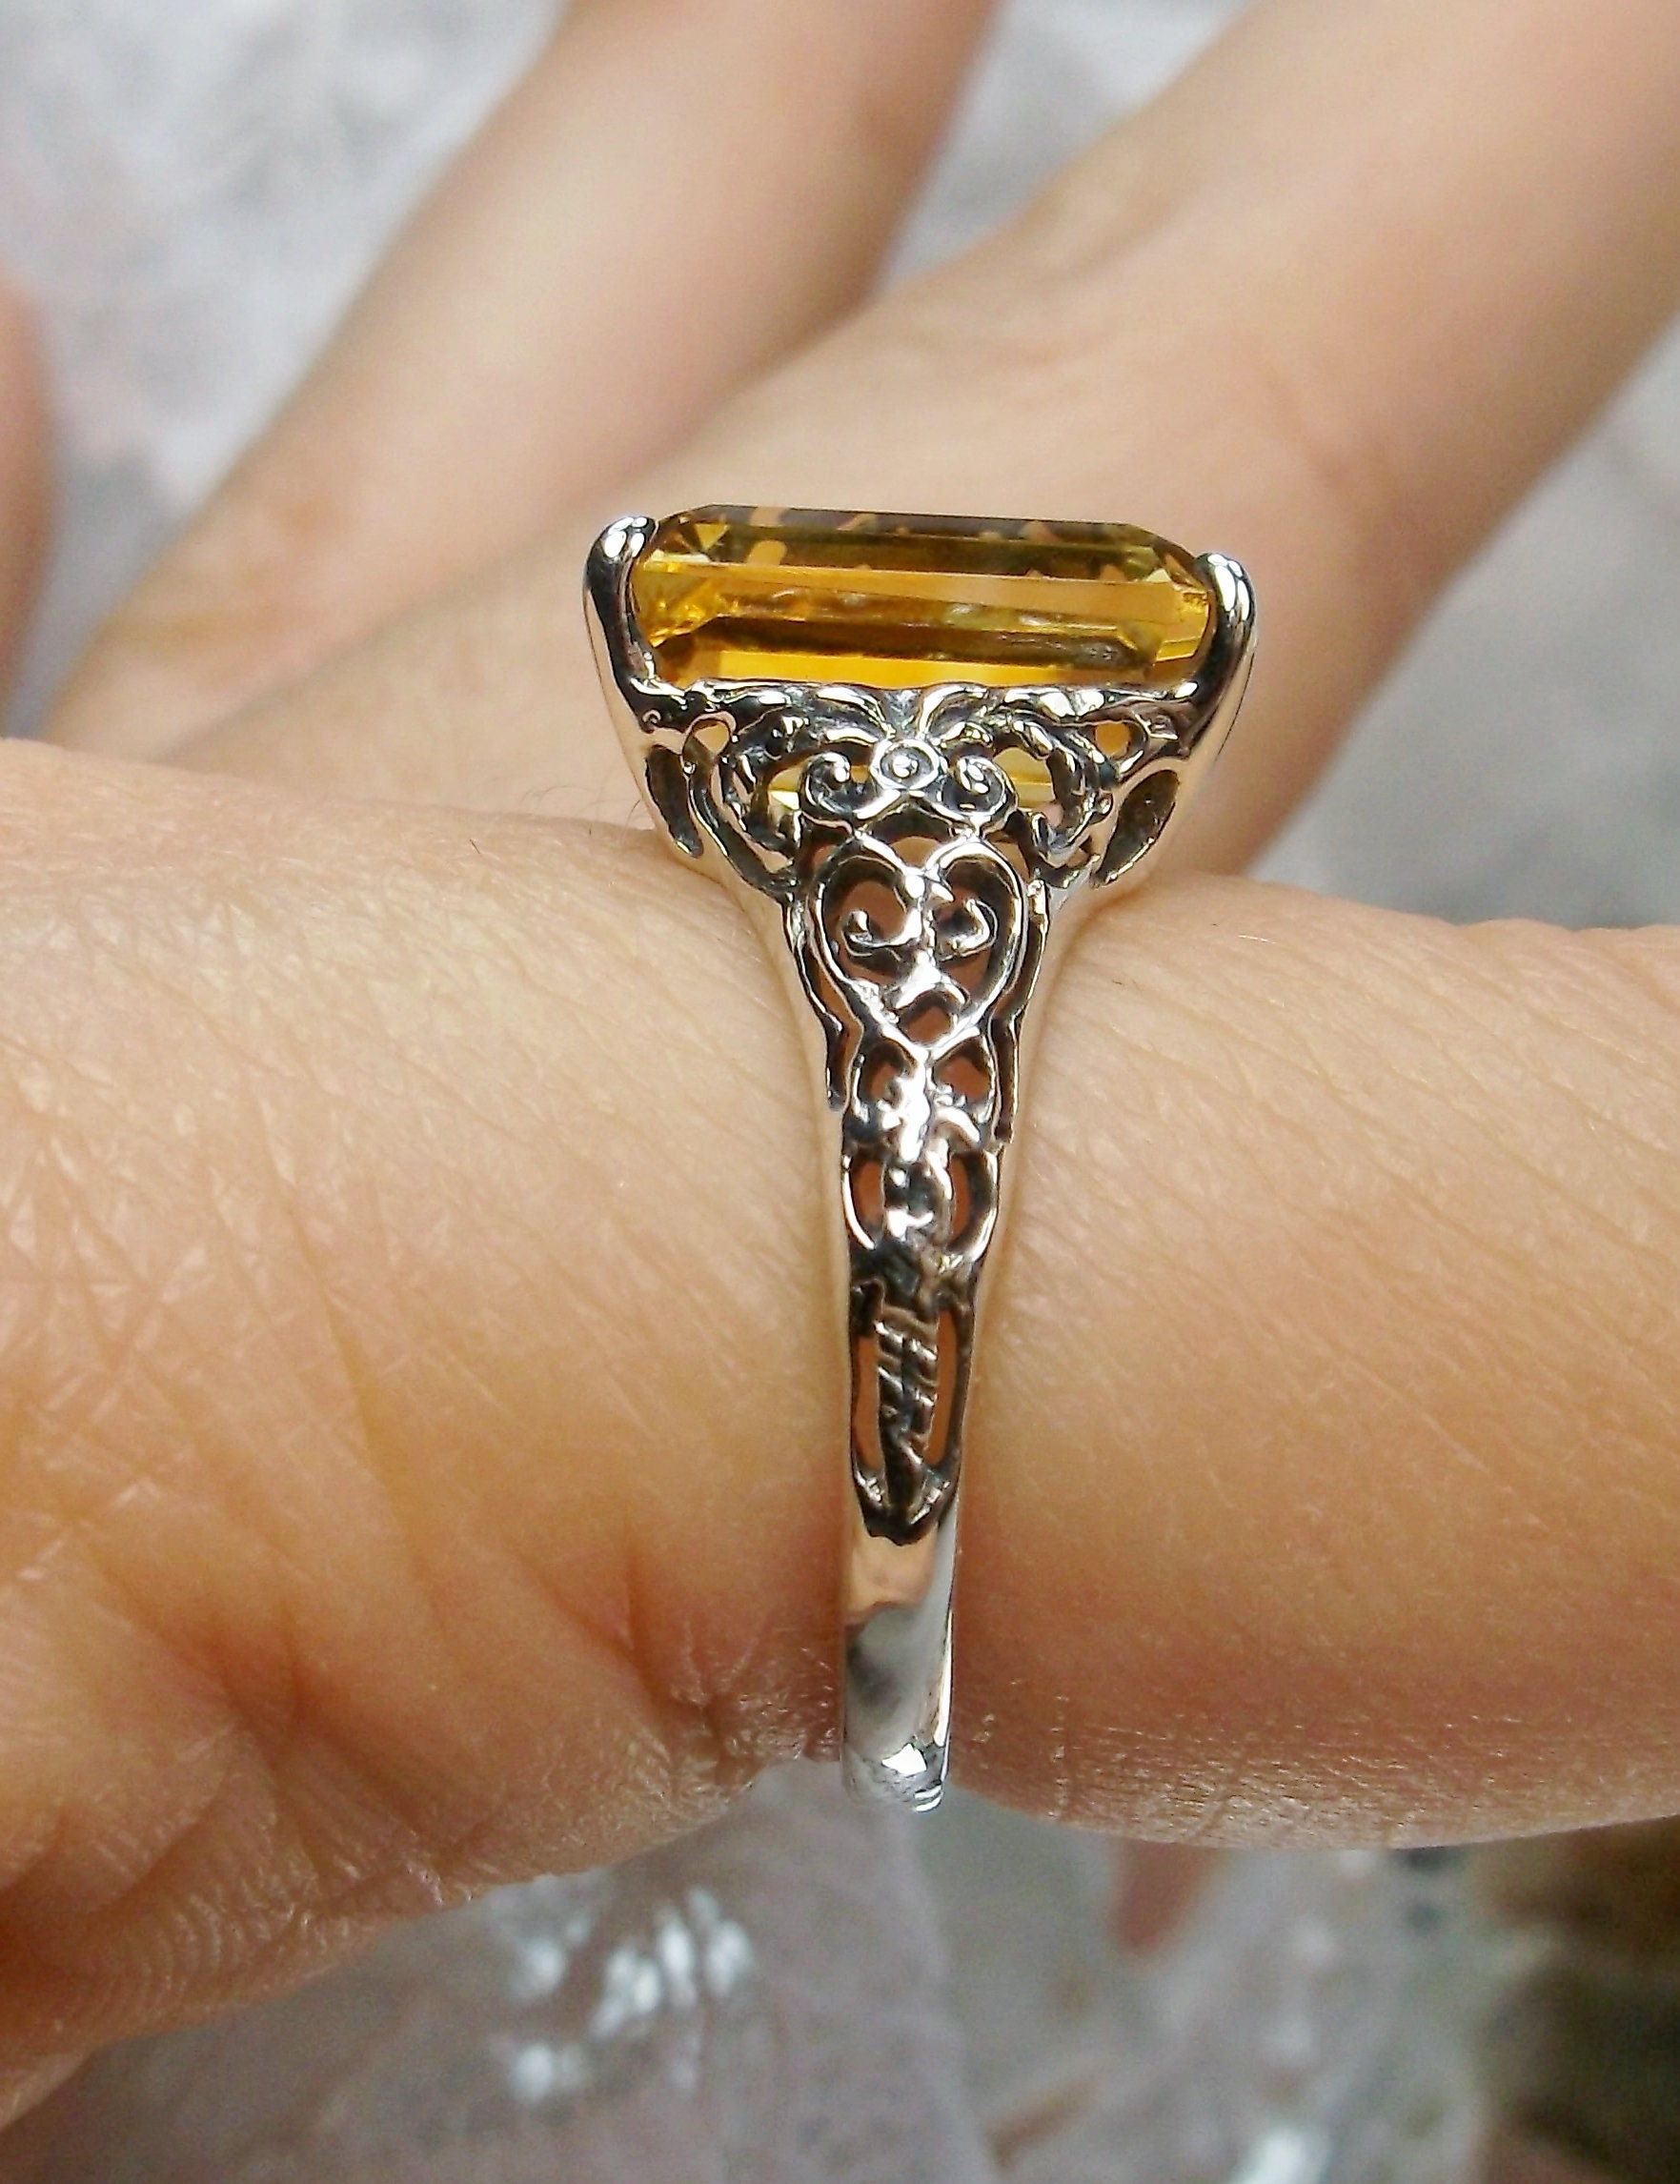 Jewelryonclick Genuine 5 Carat Citrine Silver Adjustable Rings for